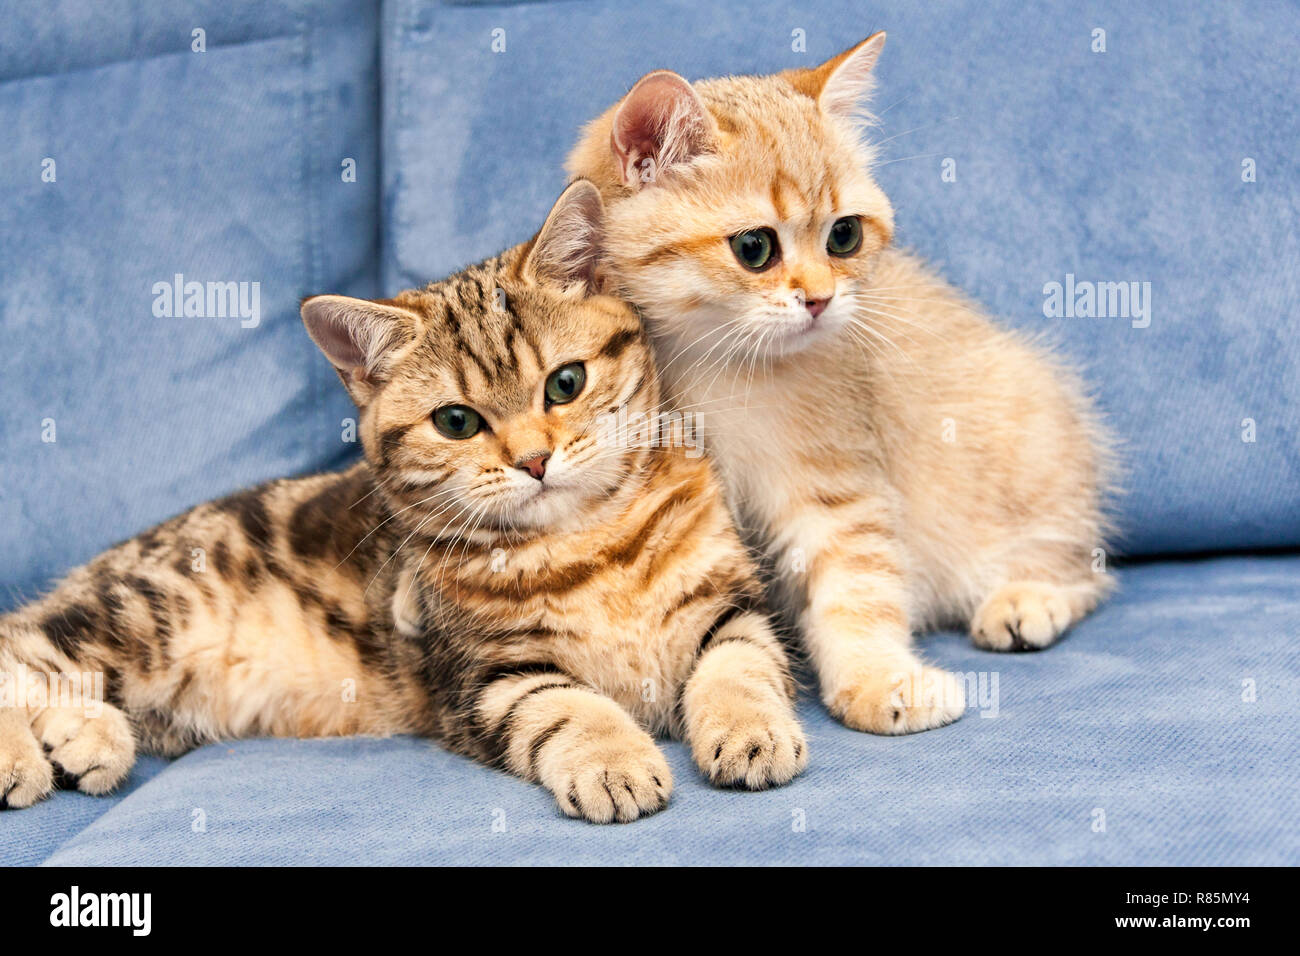 Two cute Golden British kittens with green eyes sit together on a blue sofa, one kitten hugs the other with his paw. Stock Photo